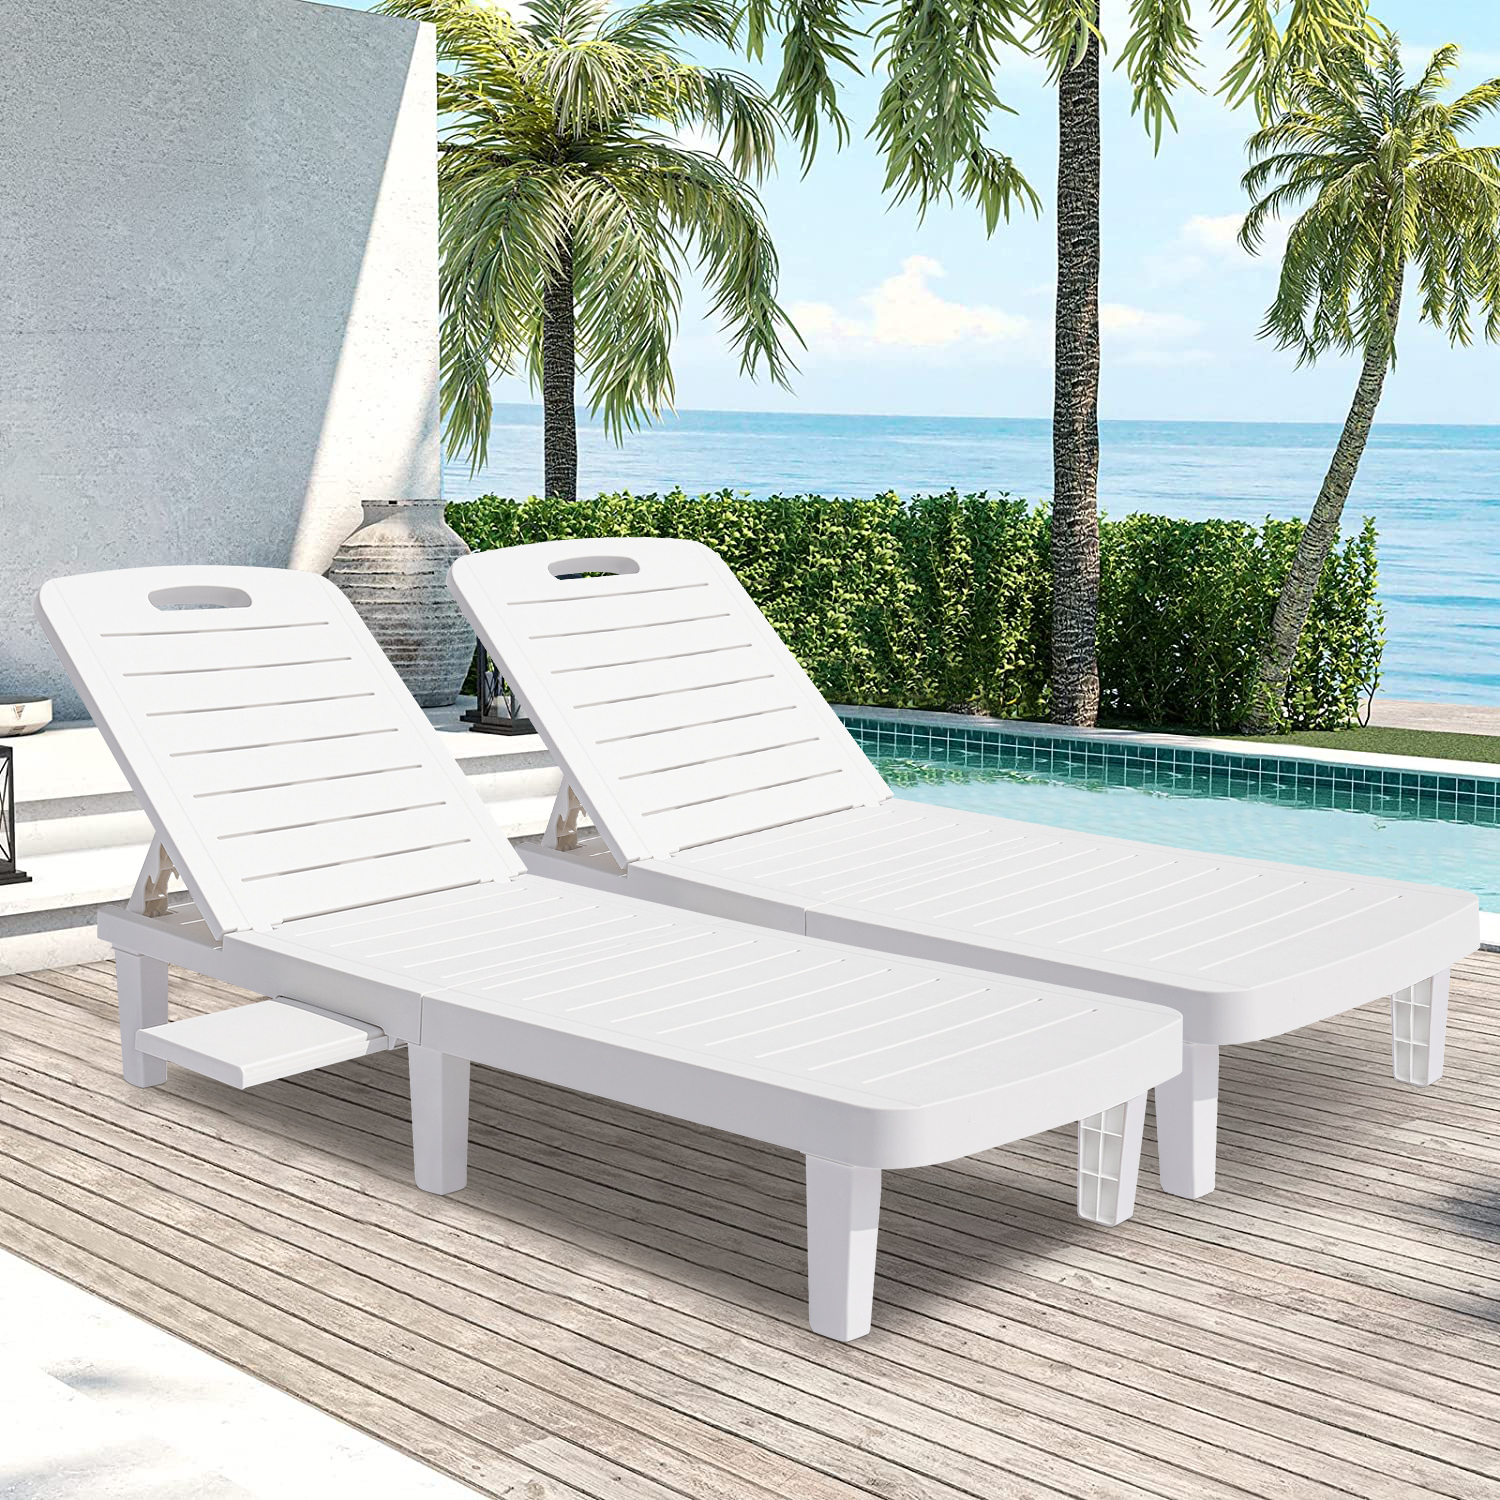 2 Piece Outdoor Lounge Chairs, Patio Furniture Patio Chaise Lounge Chair with Adjustable Backrest and Retractable Tray, Plastic Reclining Lounge Chair for Beach, Backyard, Garden, Poolside, L4550 - image 1 of 10